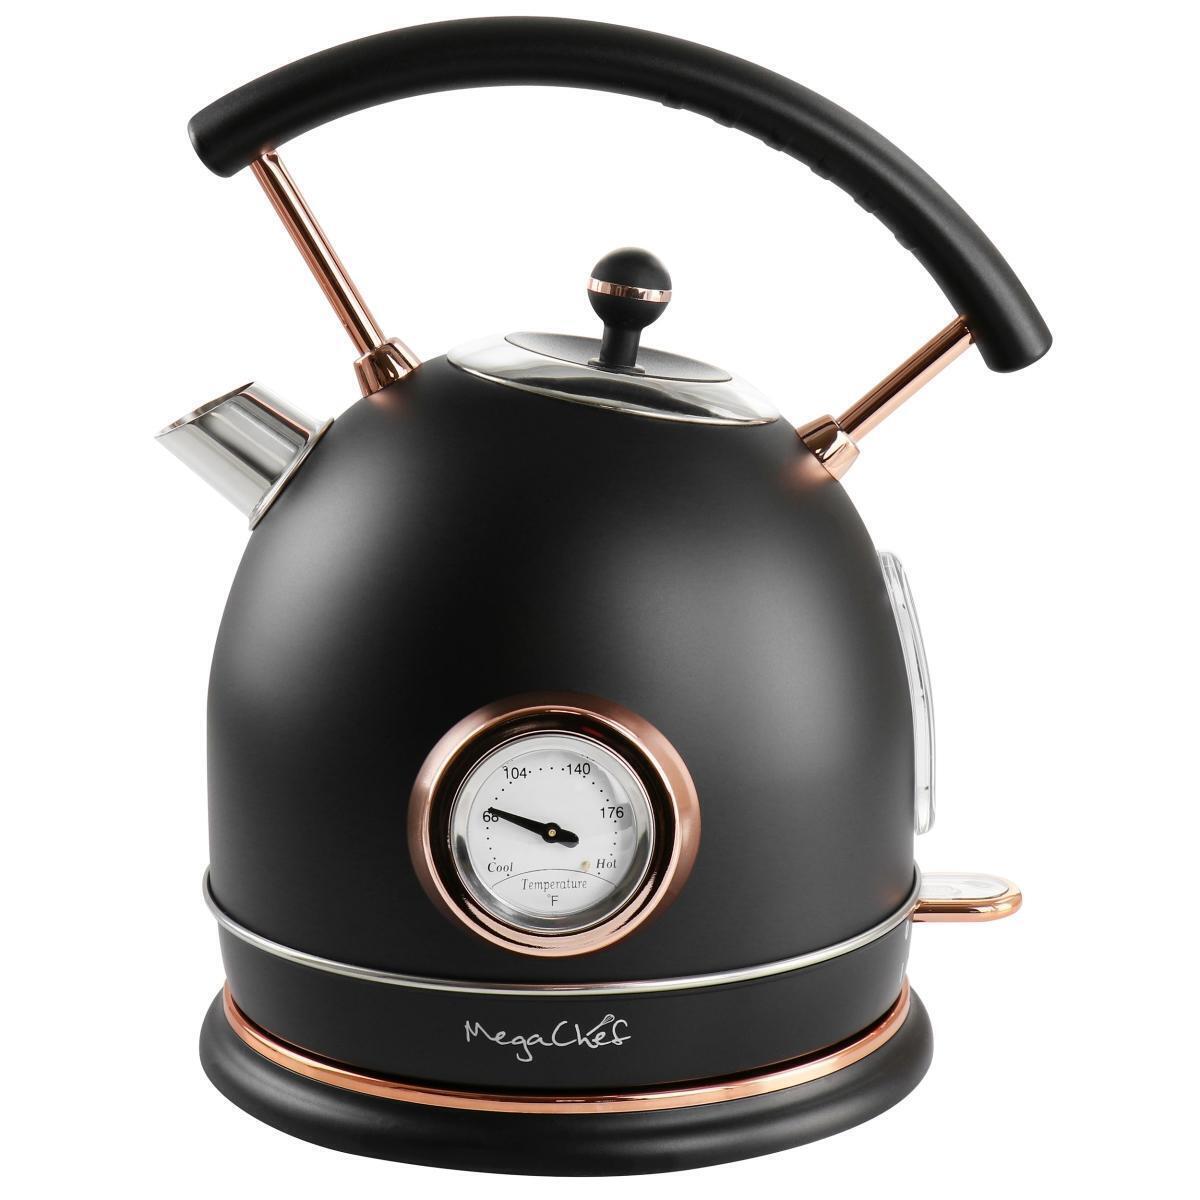 MegaChef MG-KTL2000B 1.8 Liter Half Circle Electric Tea Kettle with Thermostat in Matte Black